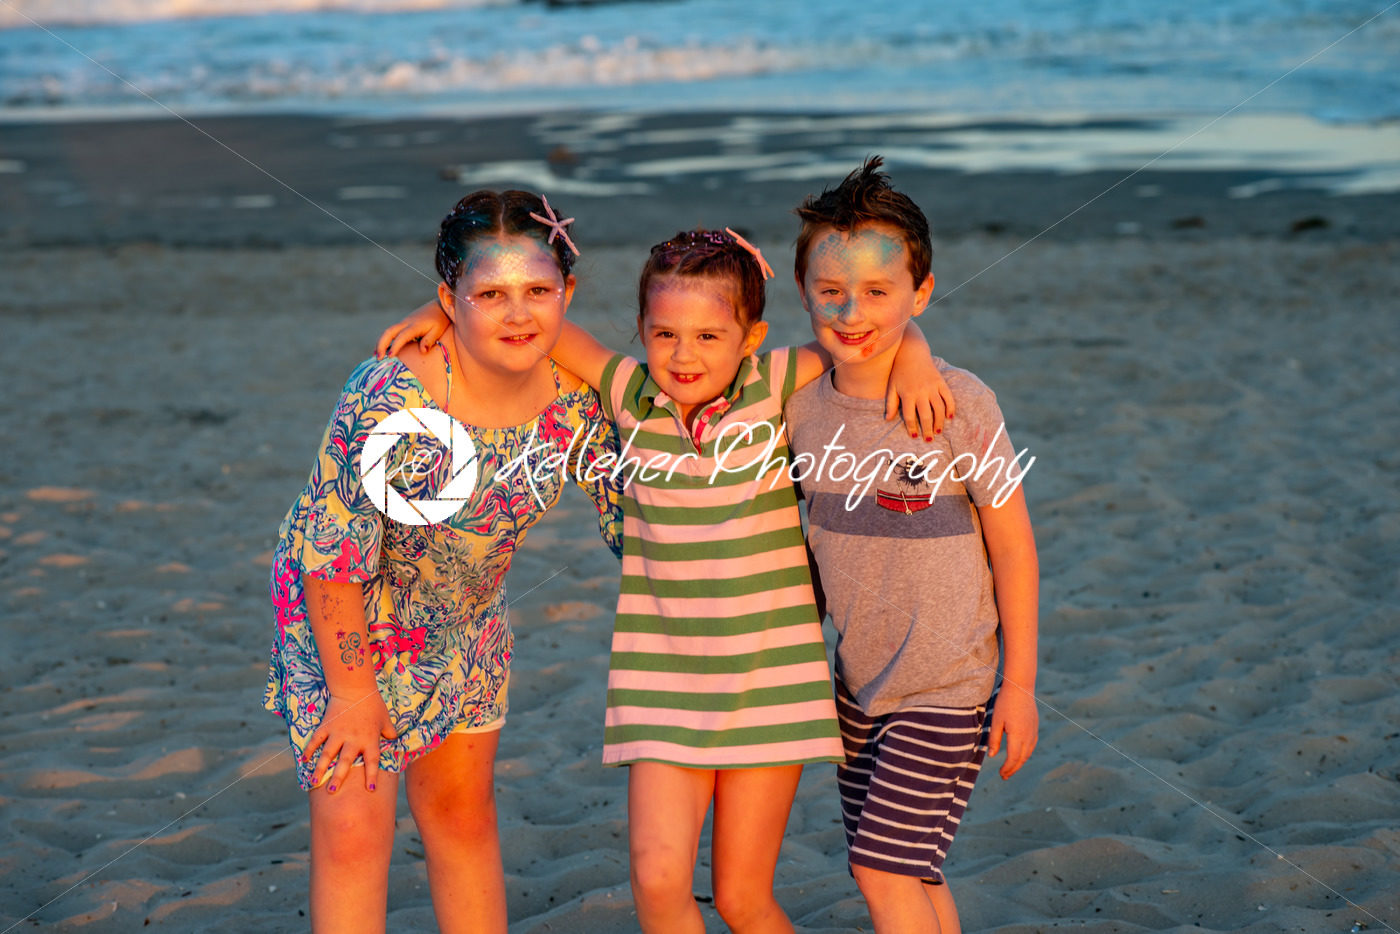 Brother and sisters on beach at sunset during the golden hour - Kelleher Photography Store